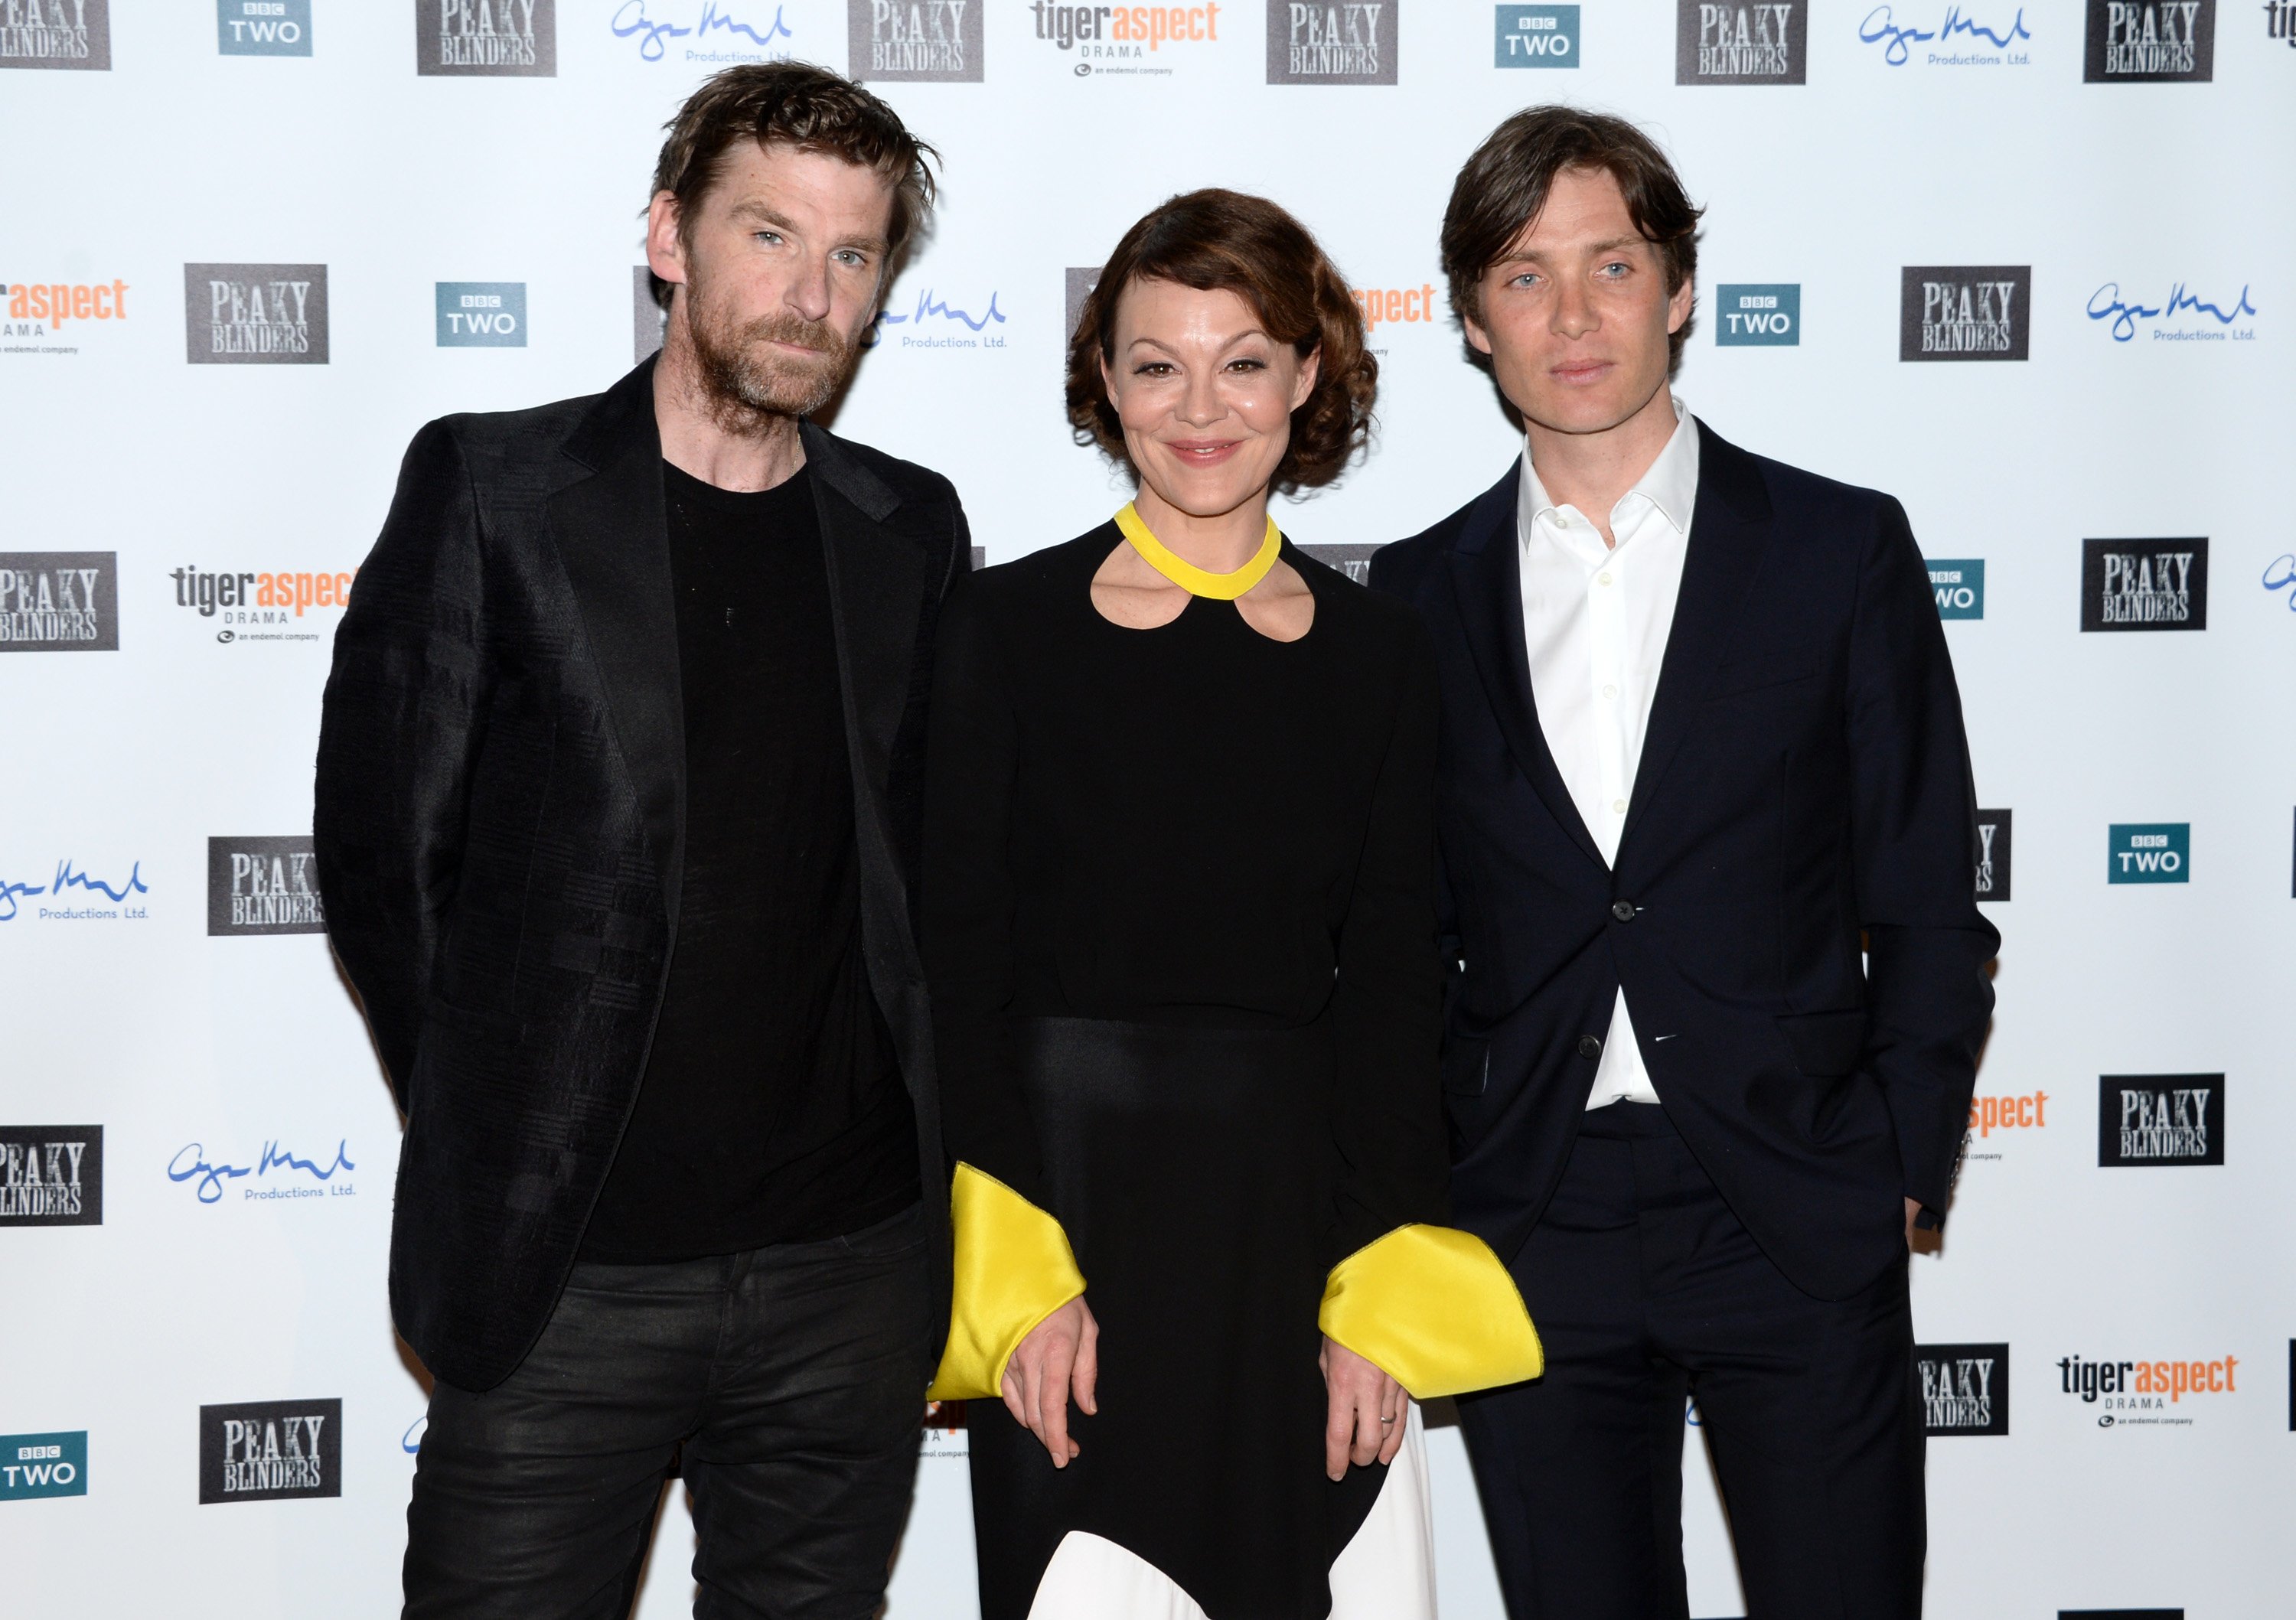 Paul Anderson, Helen McCrory, and Cillian Murphy pose for a photo at the premiere of 'Peaky Blinders' Season 3.